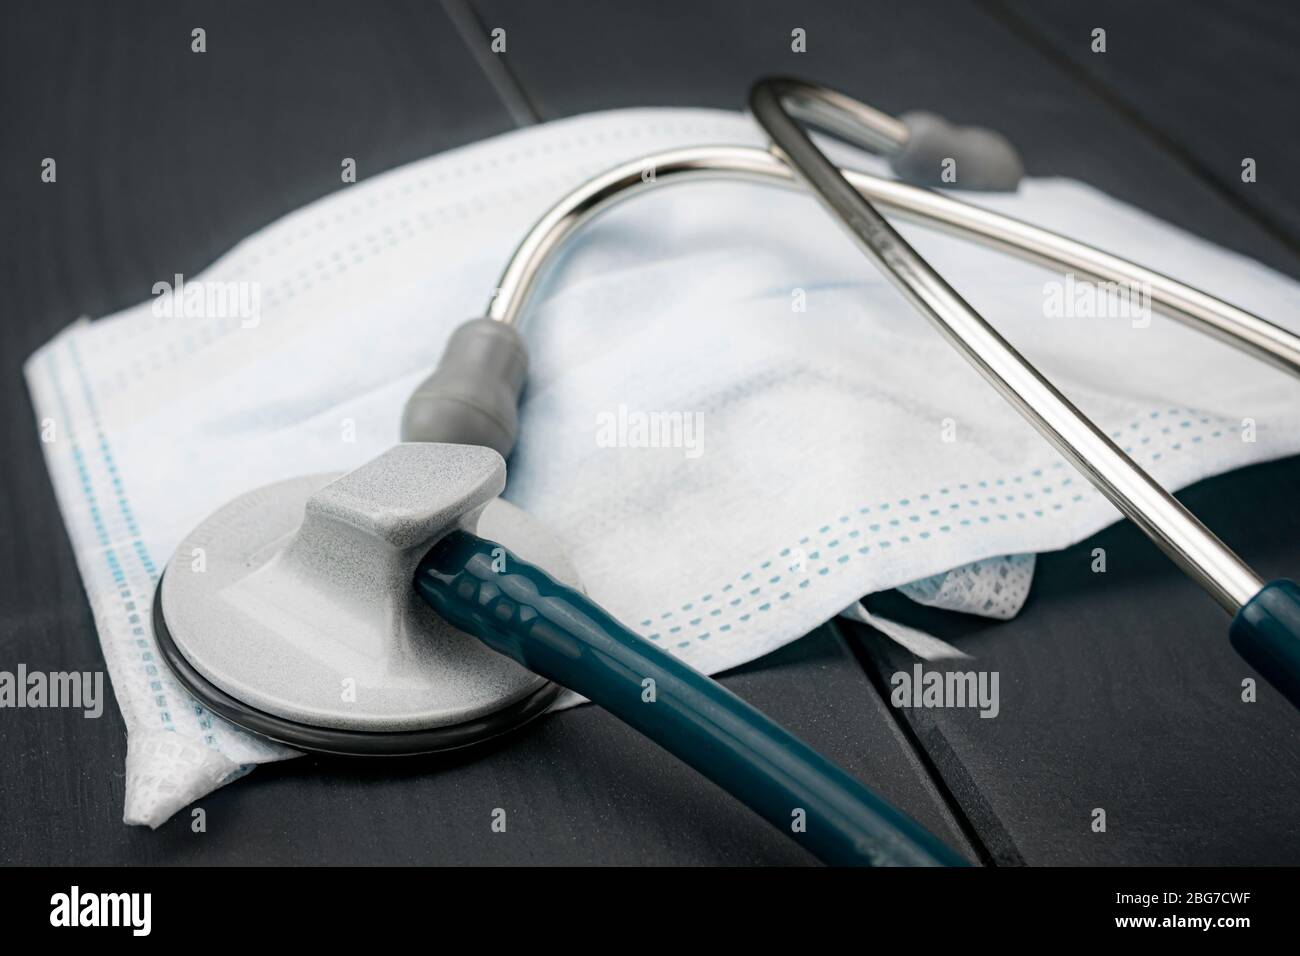 Stethoscope and face mask to prevent and diagnose respiratory viral or bacterial diseases such as coronavirus or covid-19 Stock Photo